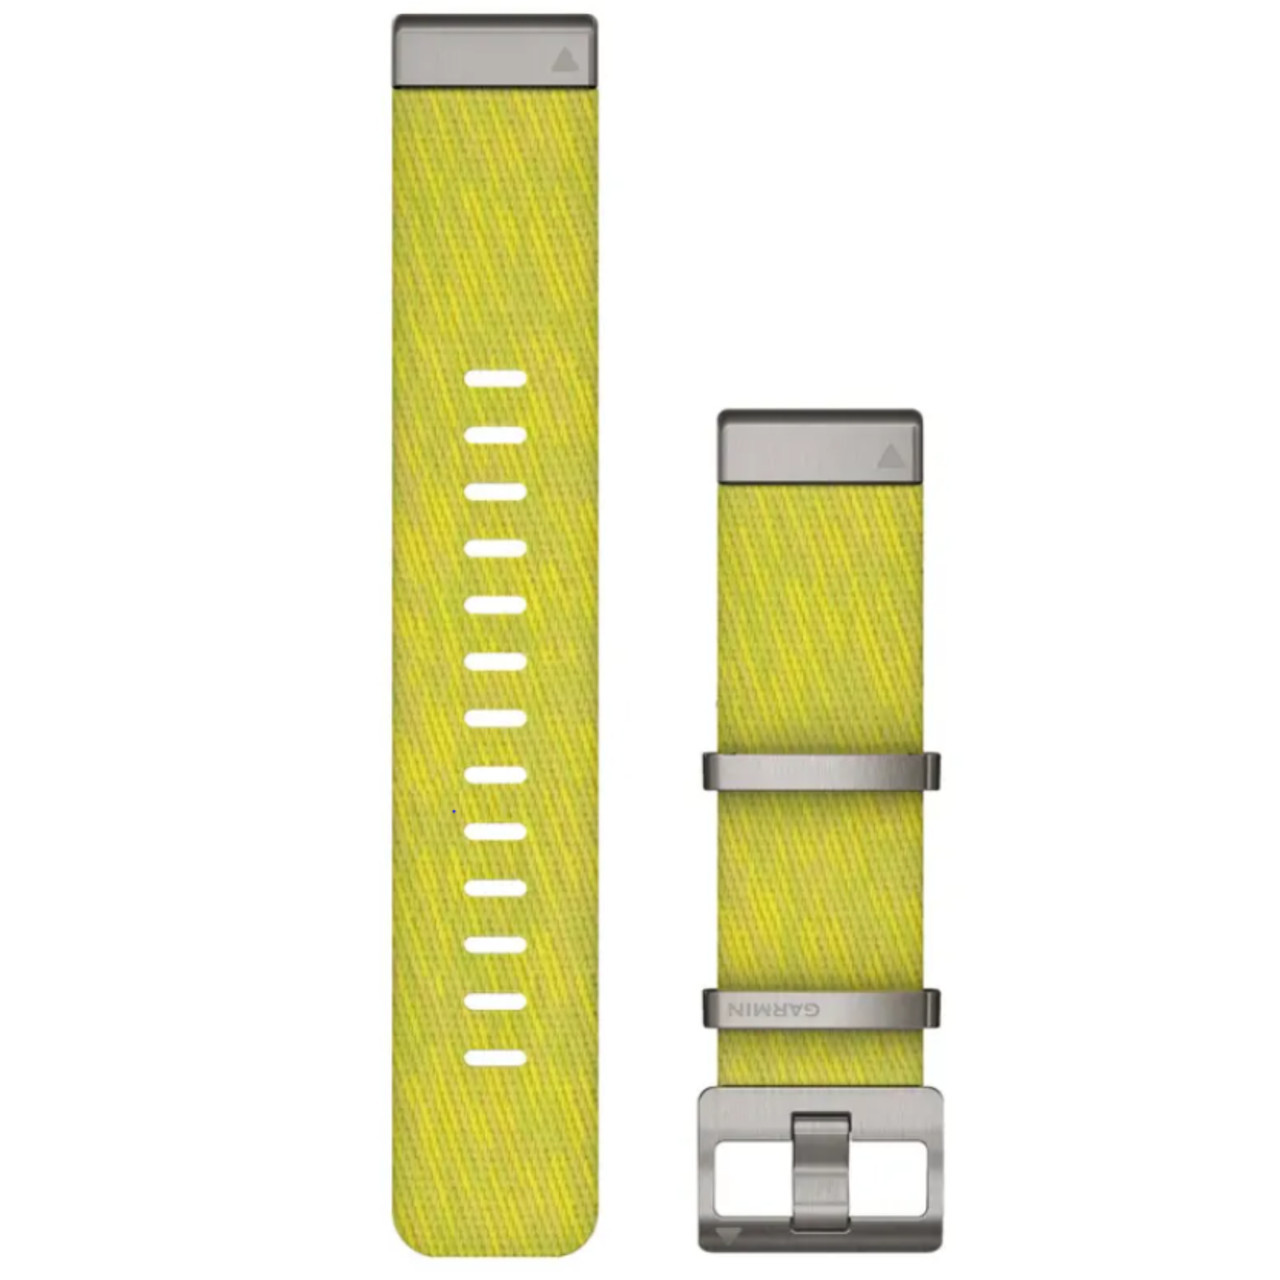 QuickFit® 22 Watch Straps (MARQ™ Collection)